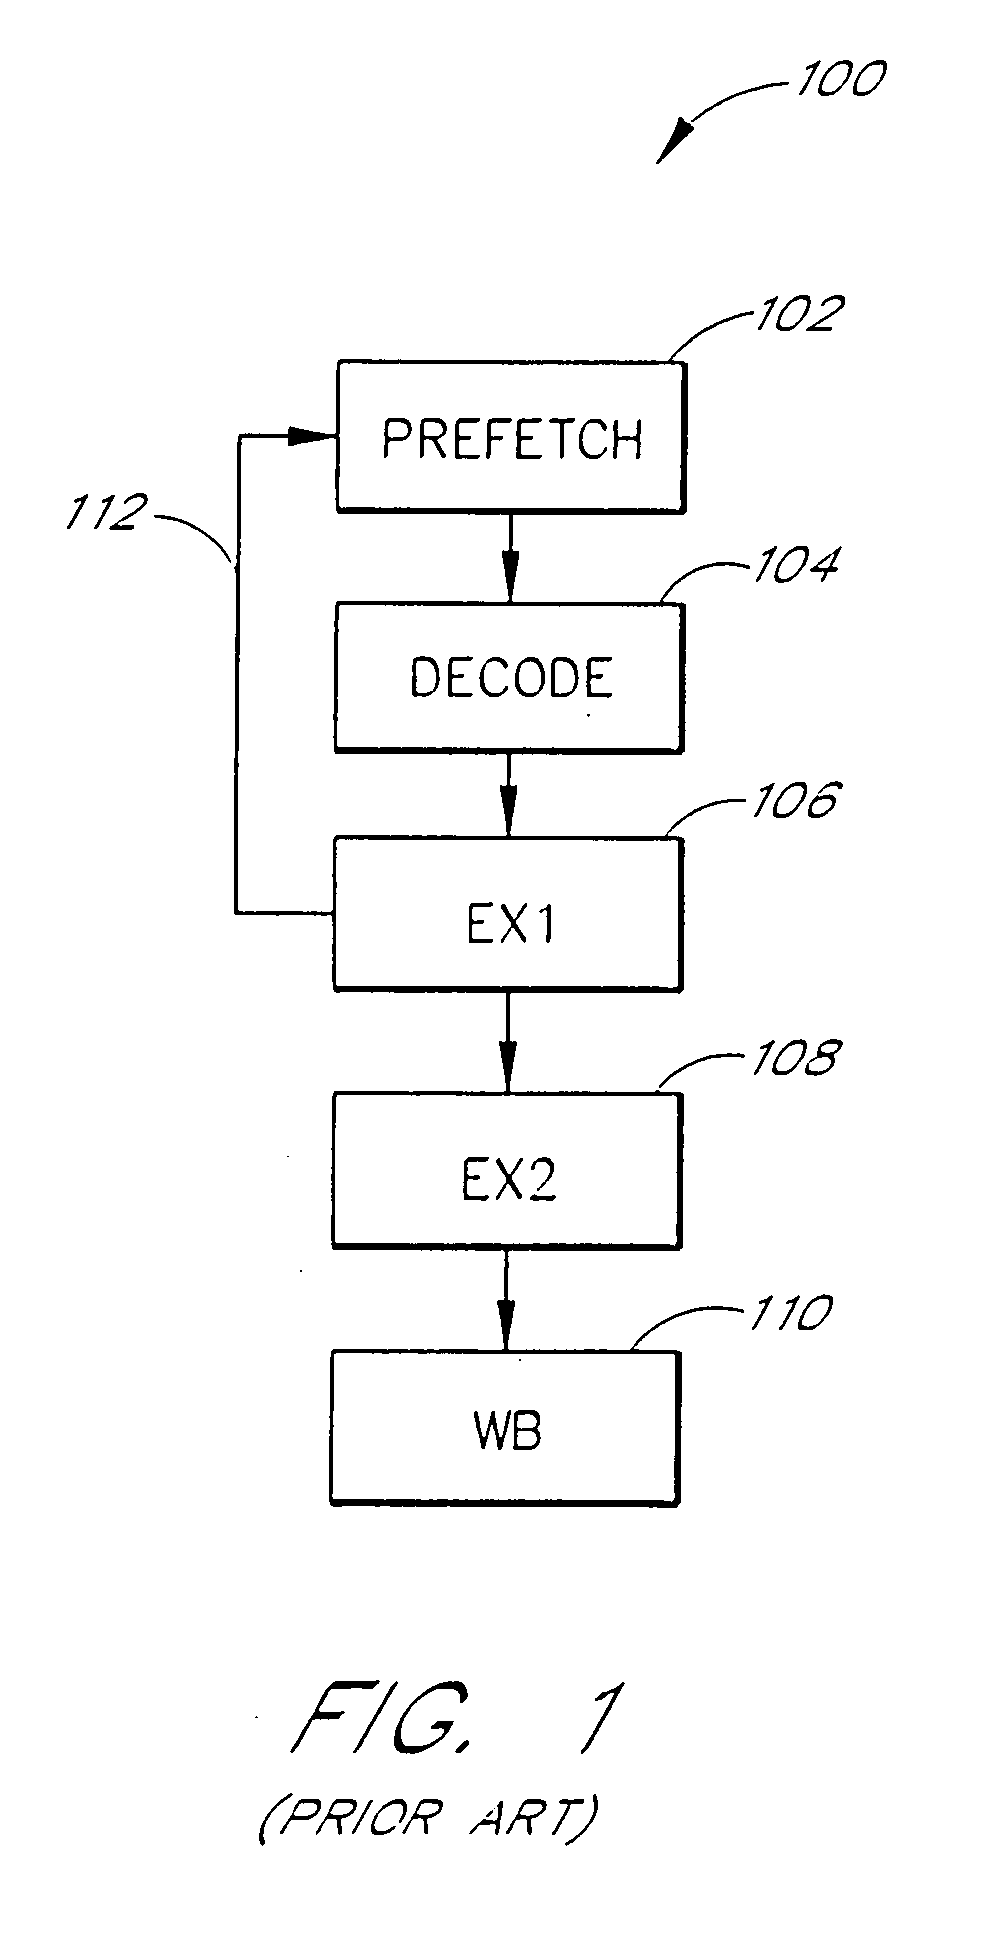 Method and apparatus for high performance branching in pipelined microsystems